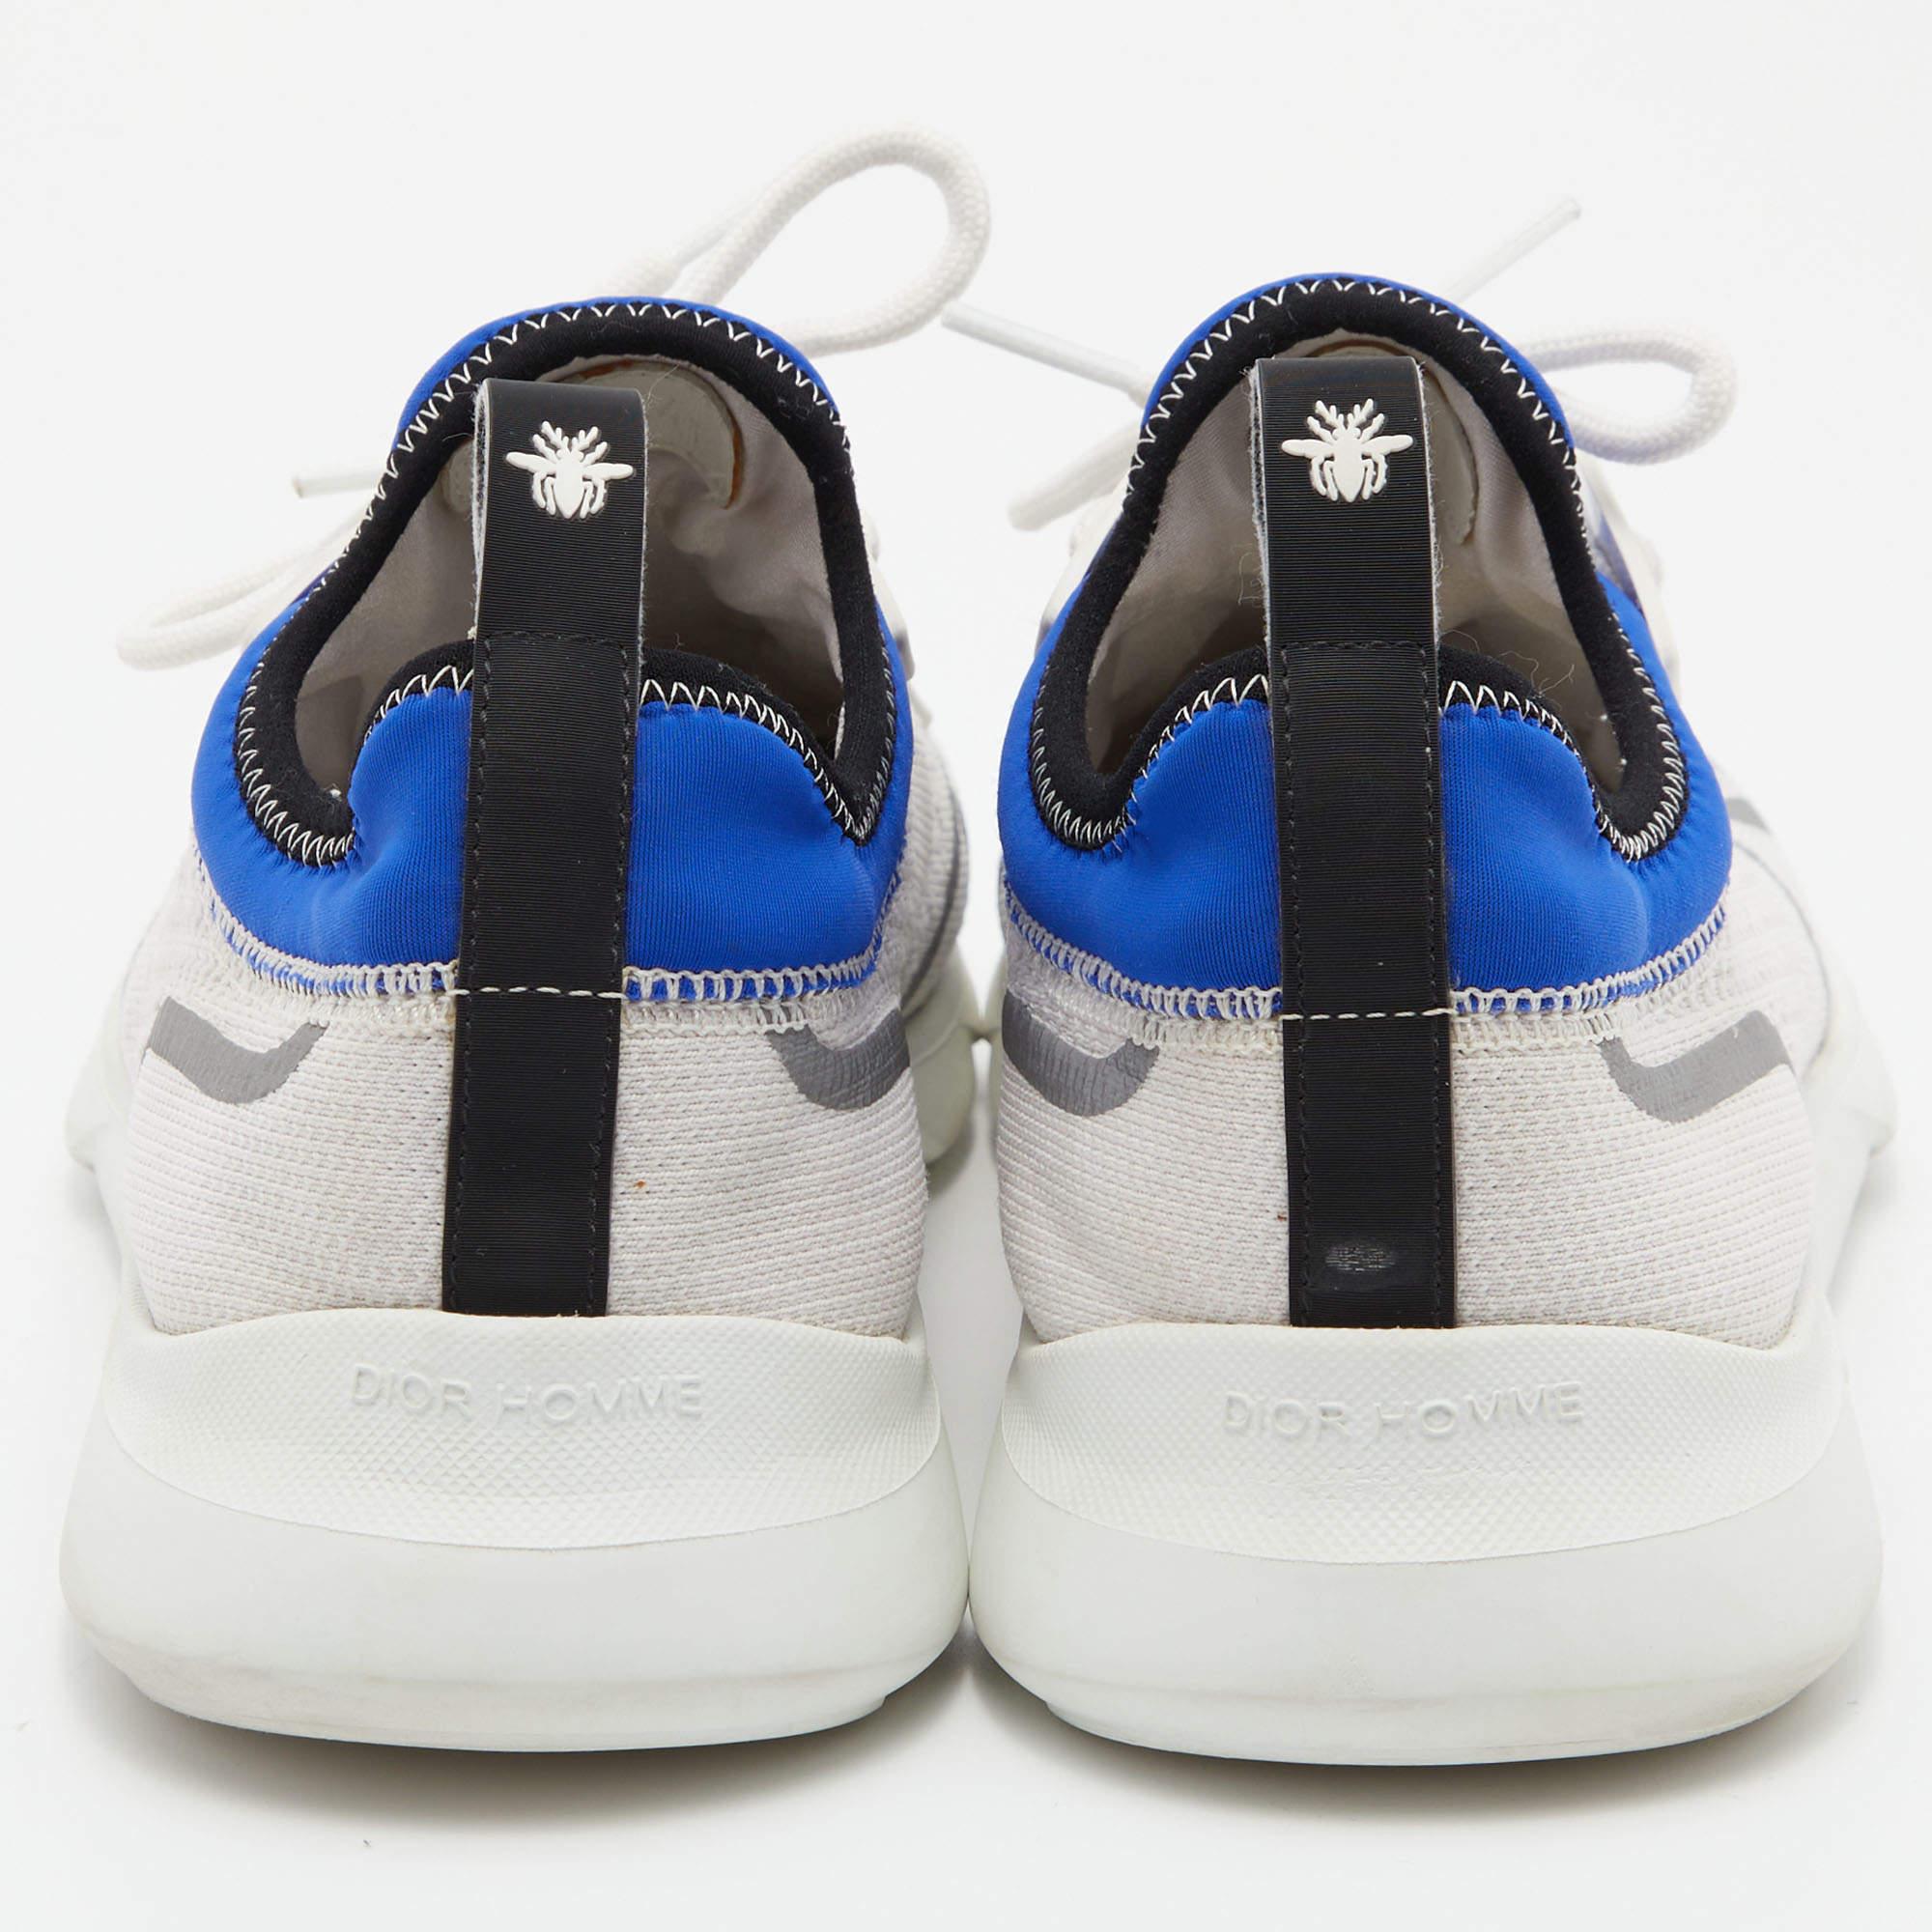 Dior Homme White/Blue Knit Fabric and Neoprene B21 Neo Sneakers Size 41 1